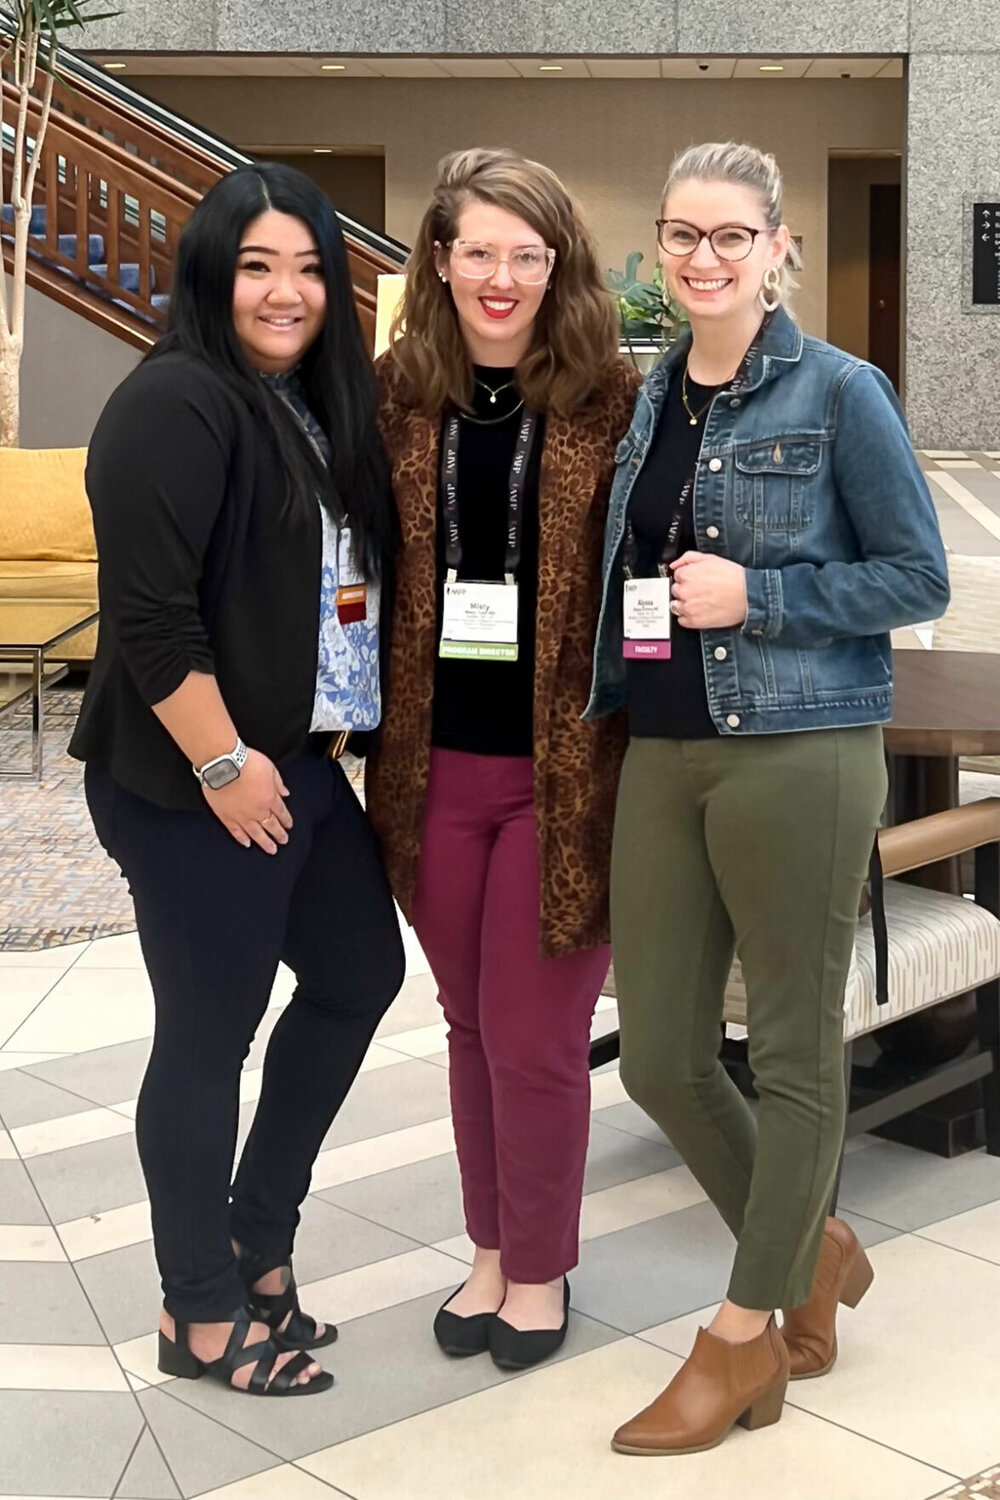 Members of the Bothwell-University of Missouri Rural Family Medicine Residency leadership team recently attended the American Academy of Family Physicians Residency Leadership Summit in Kansas City. From left, Ellie Euer, residency coordinator; Dr. Misty Todd, residency director; and Dr. Alyssa Emery, core faculty.